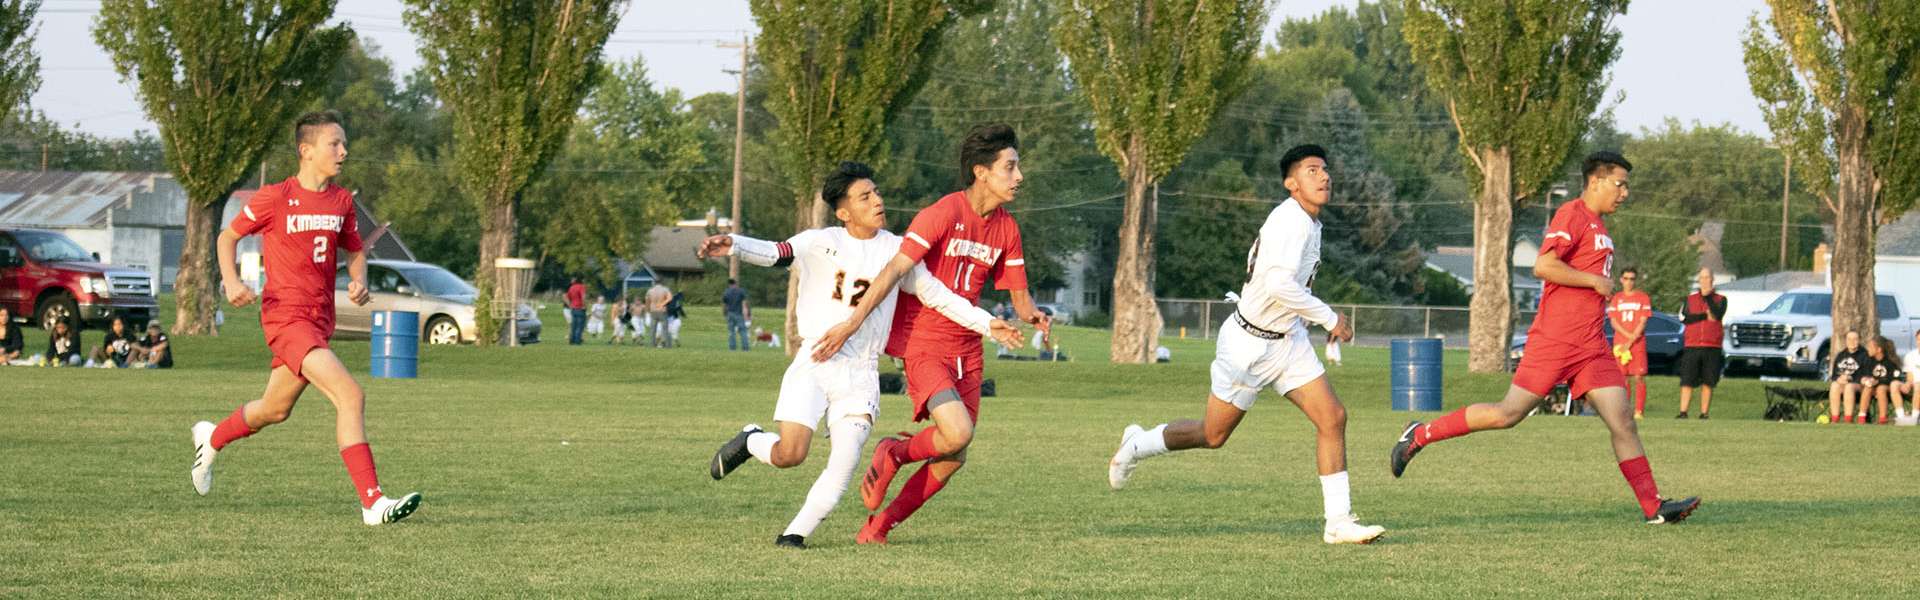 The Kimberly boys soccer team plays a match against Buhl last season. | Photo by Publications Staff